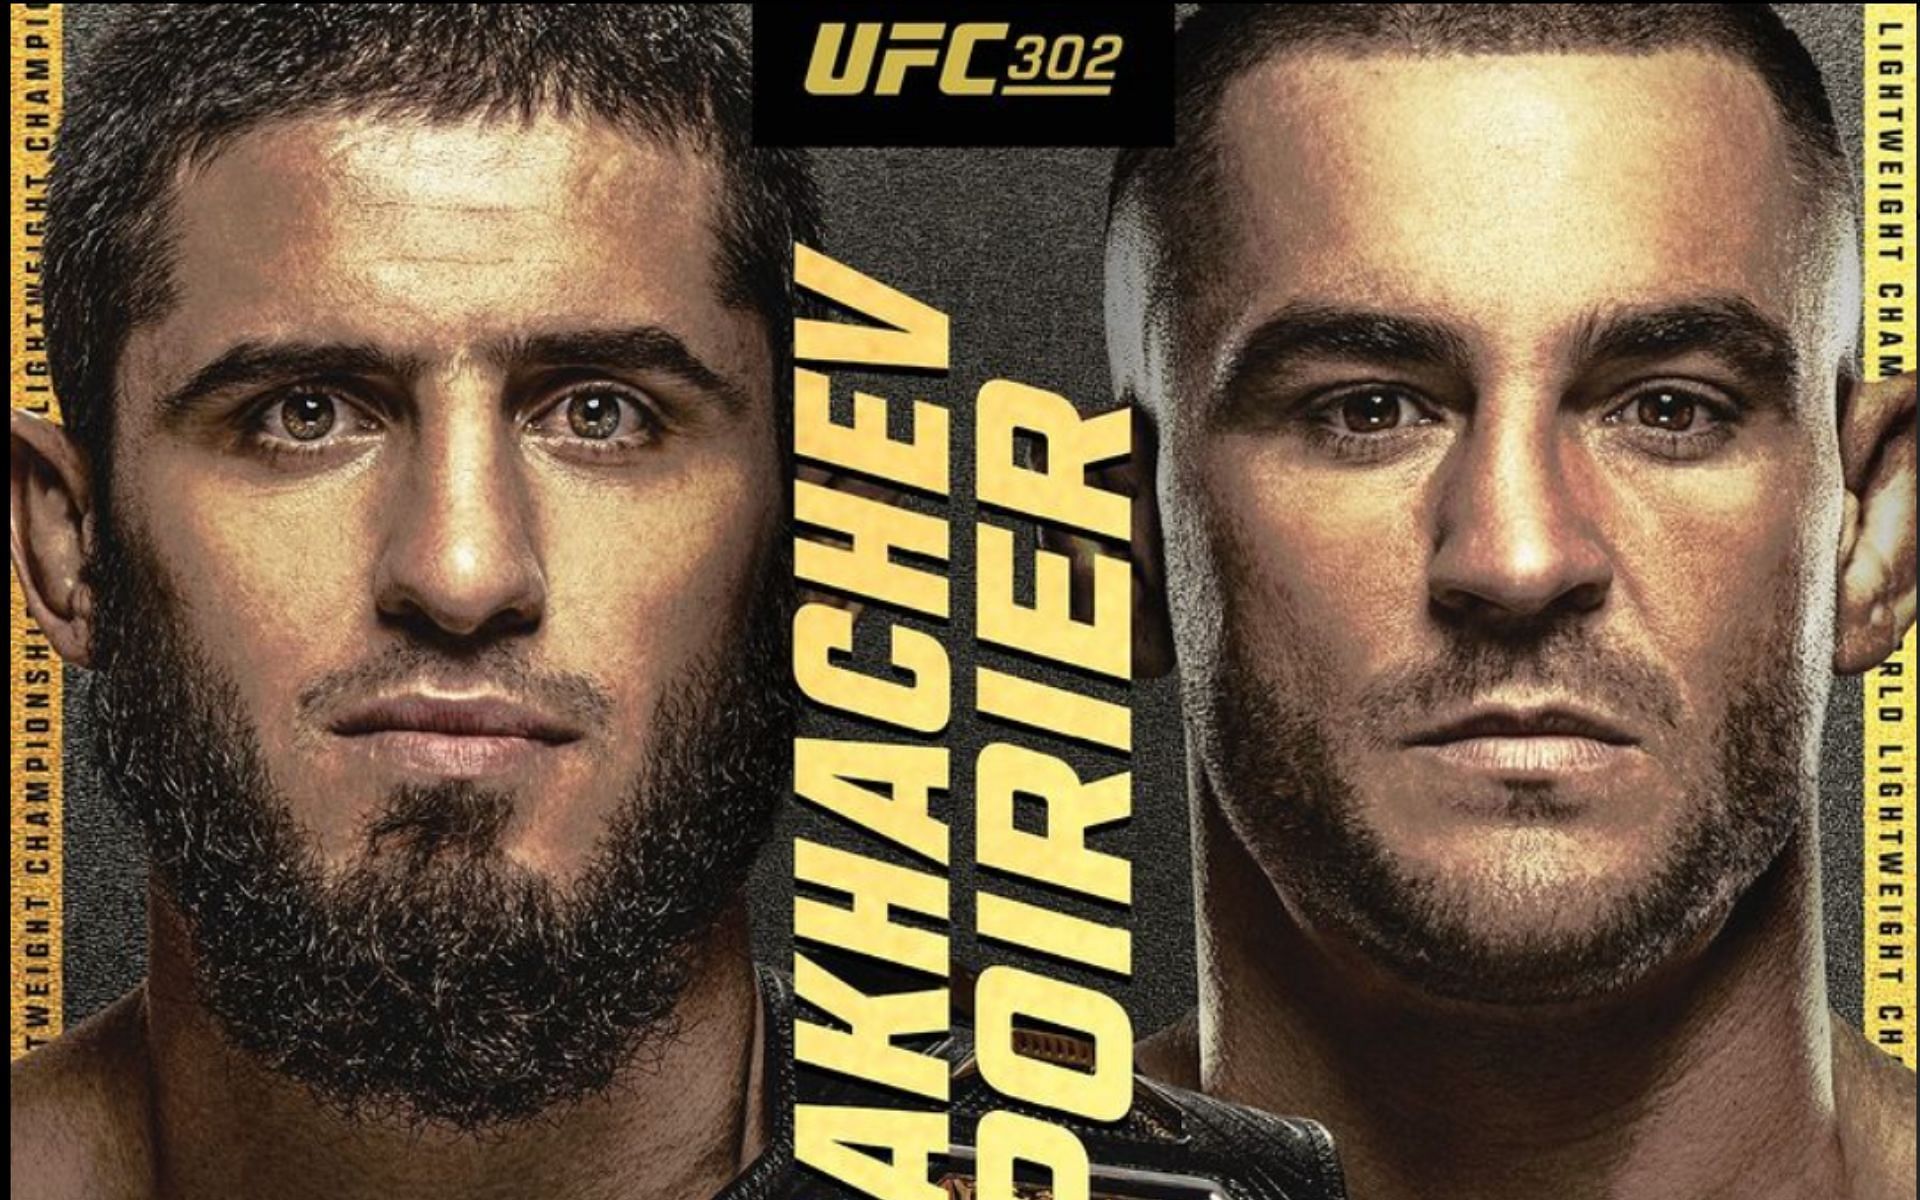 Dustin Poirier will challenge Islam Makhachev for the lightweight title at UFC 302. [via @ufc on Instagram]